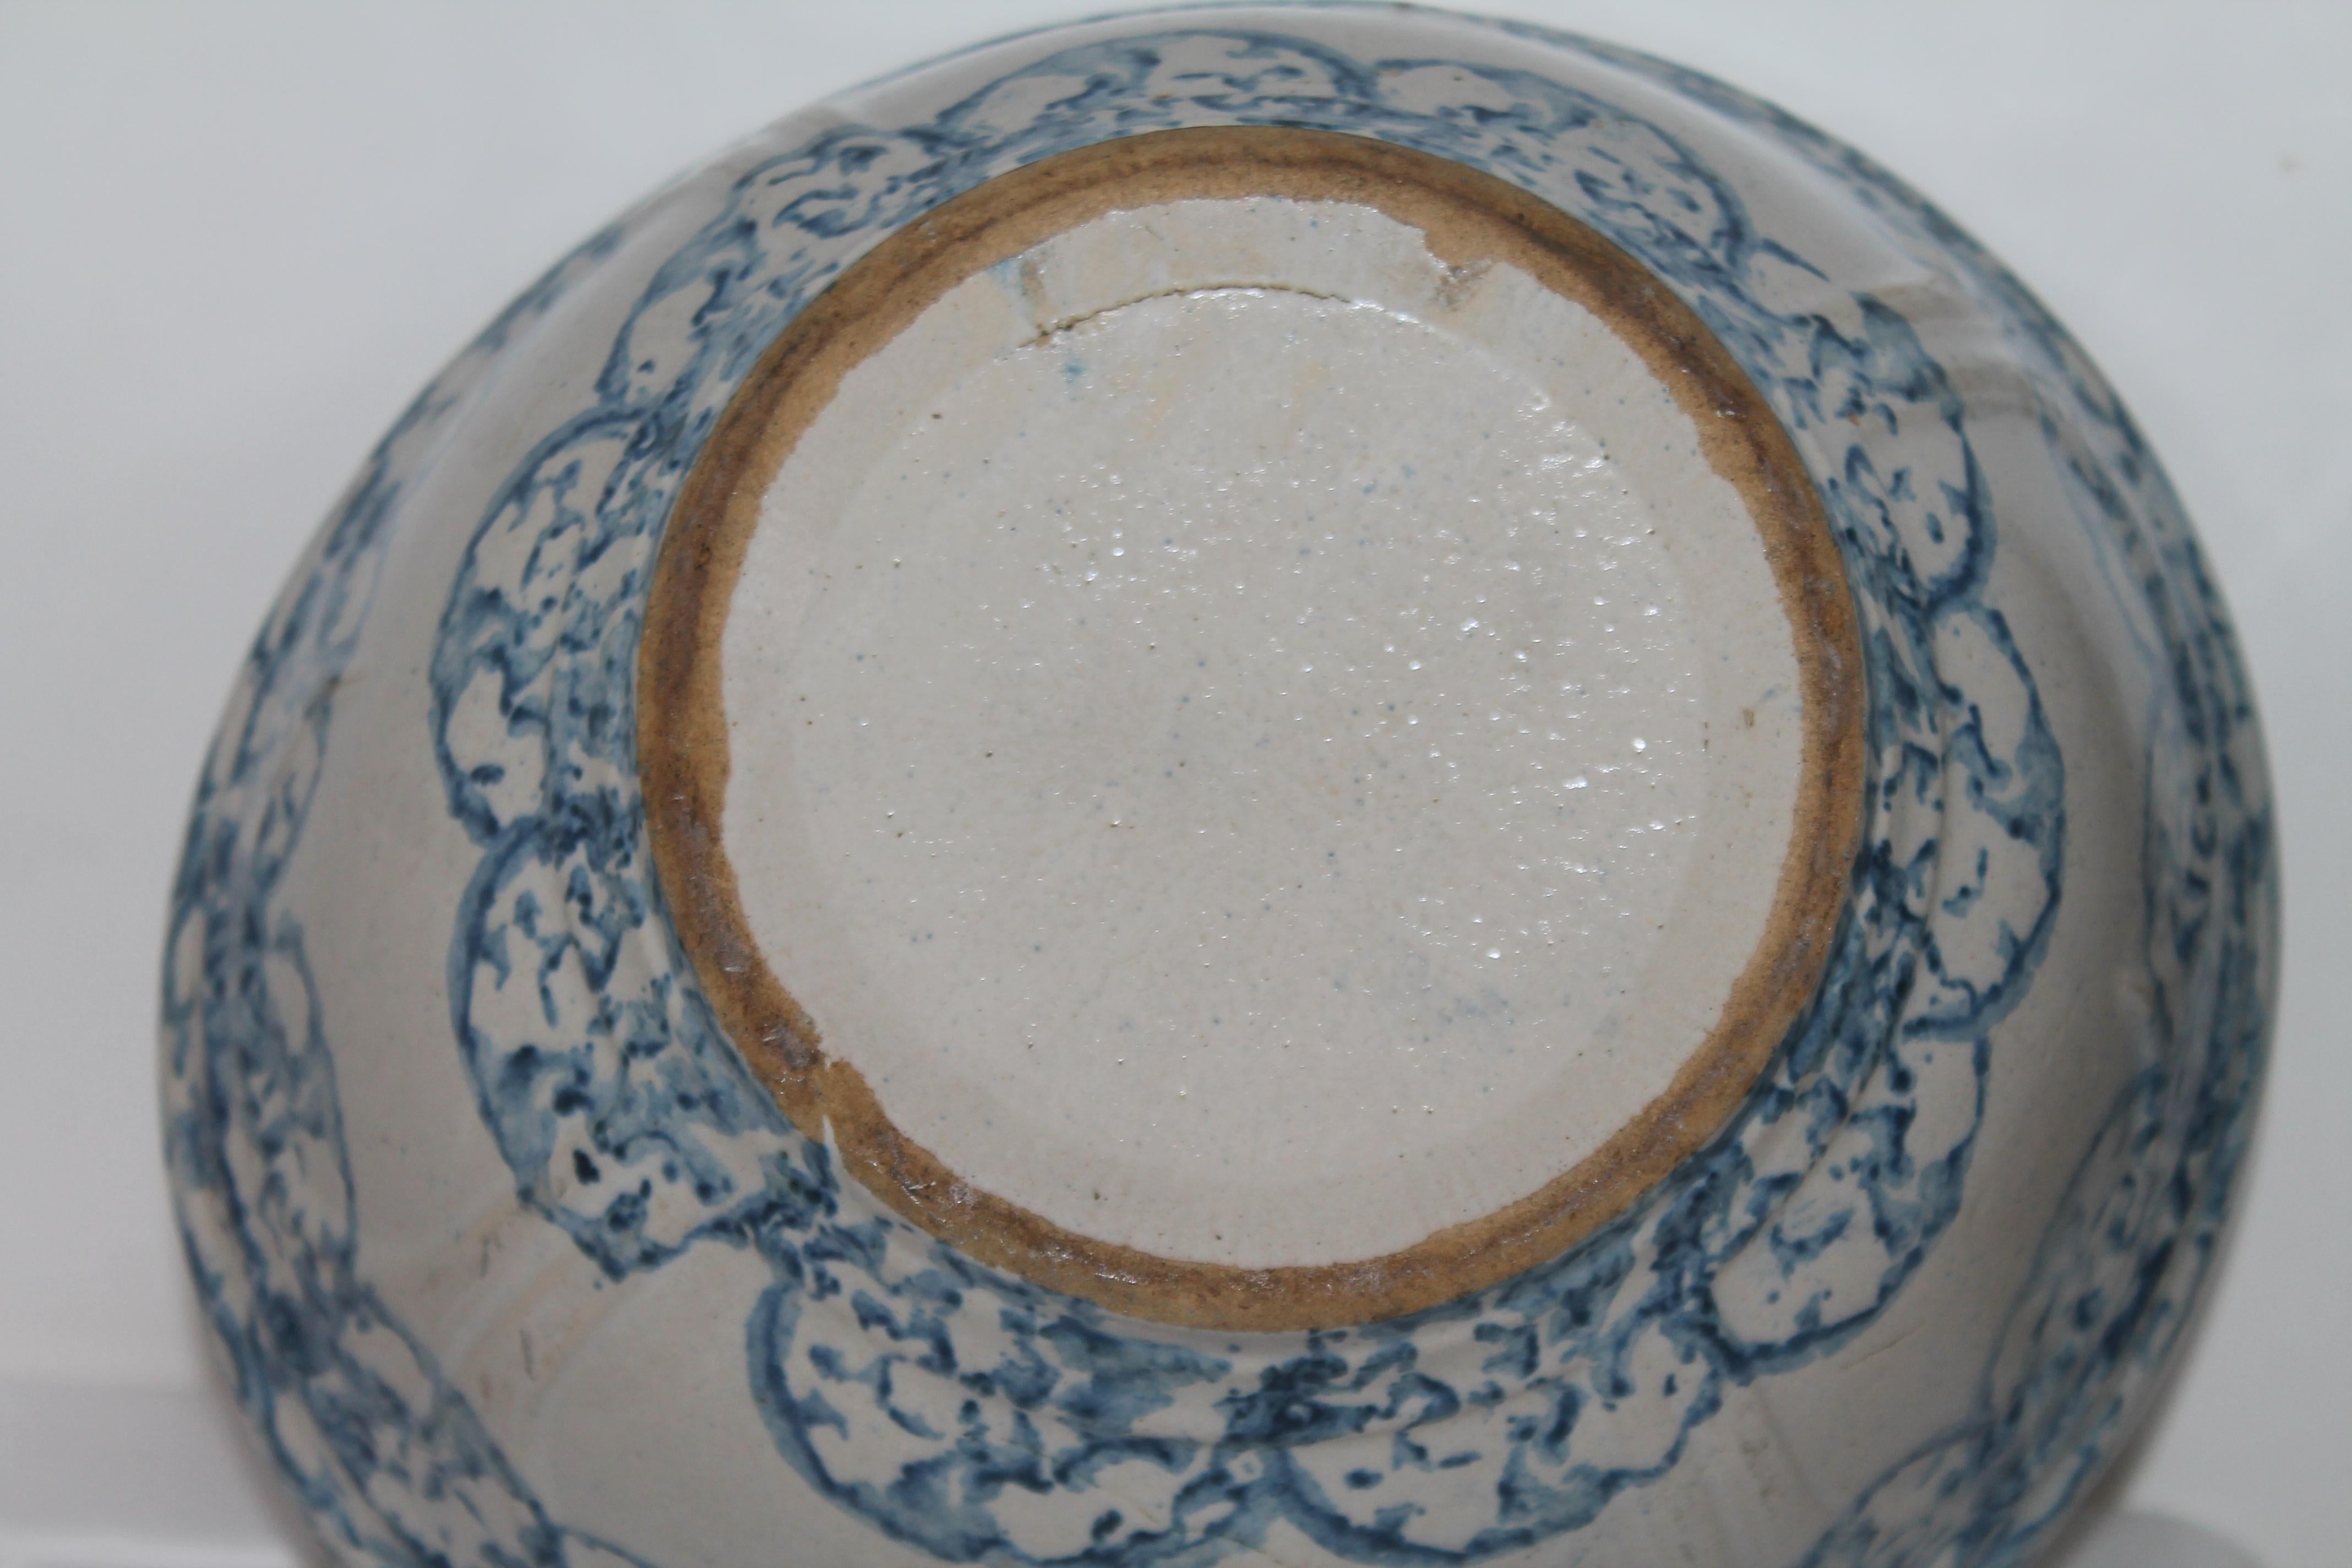 Pottery Collection of 3 of Decorated 19thc Sponge Mixing Bowls For Sale